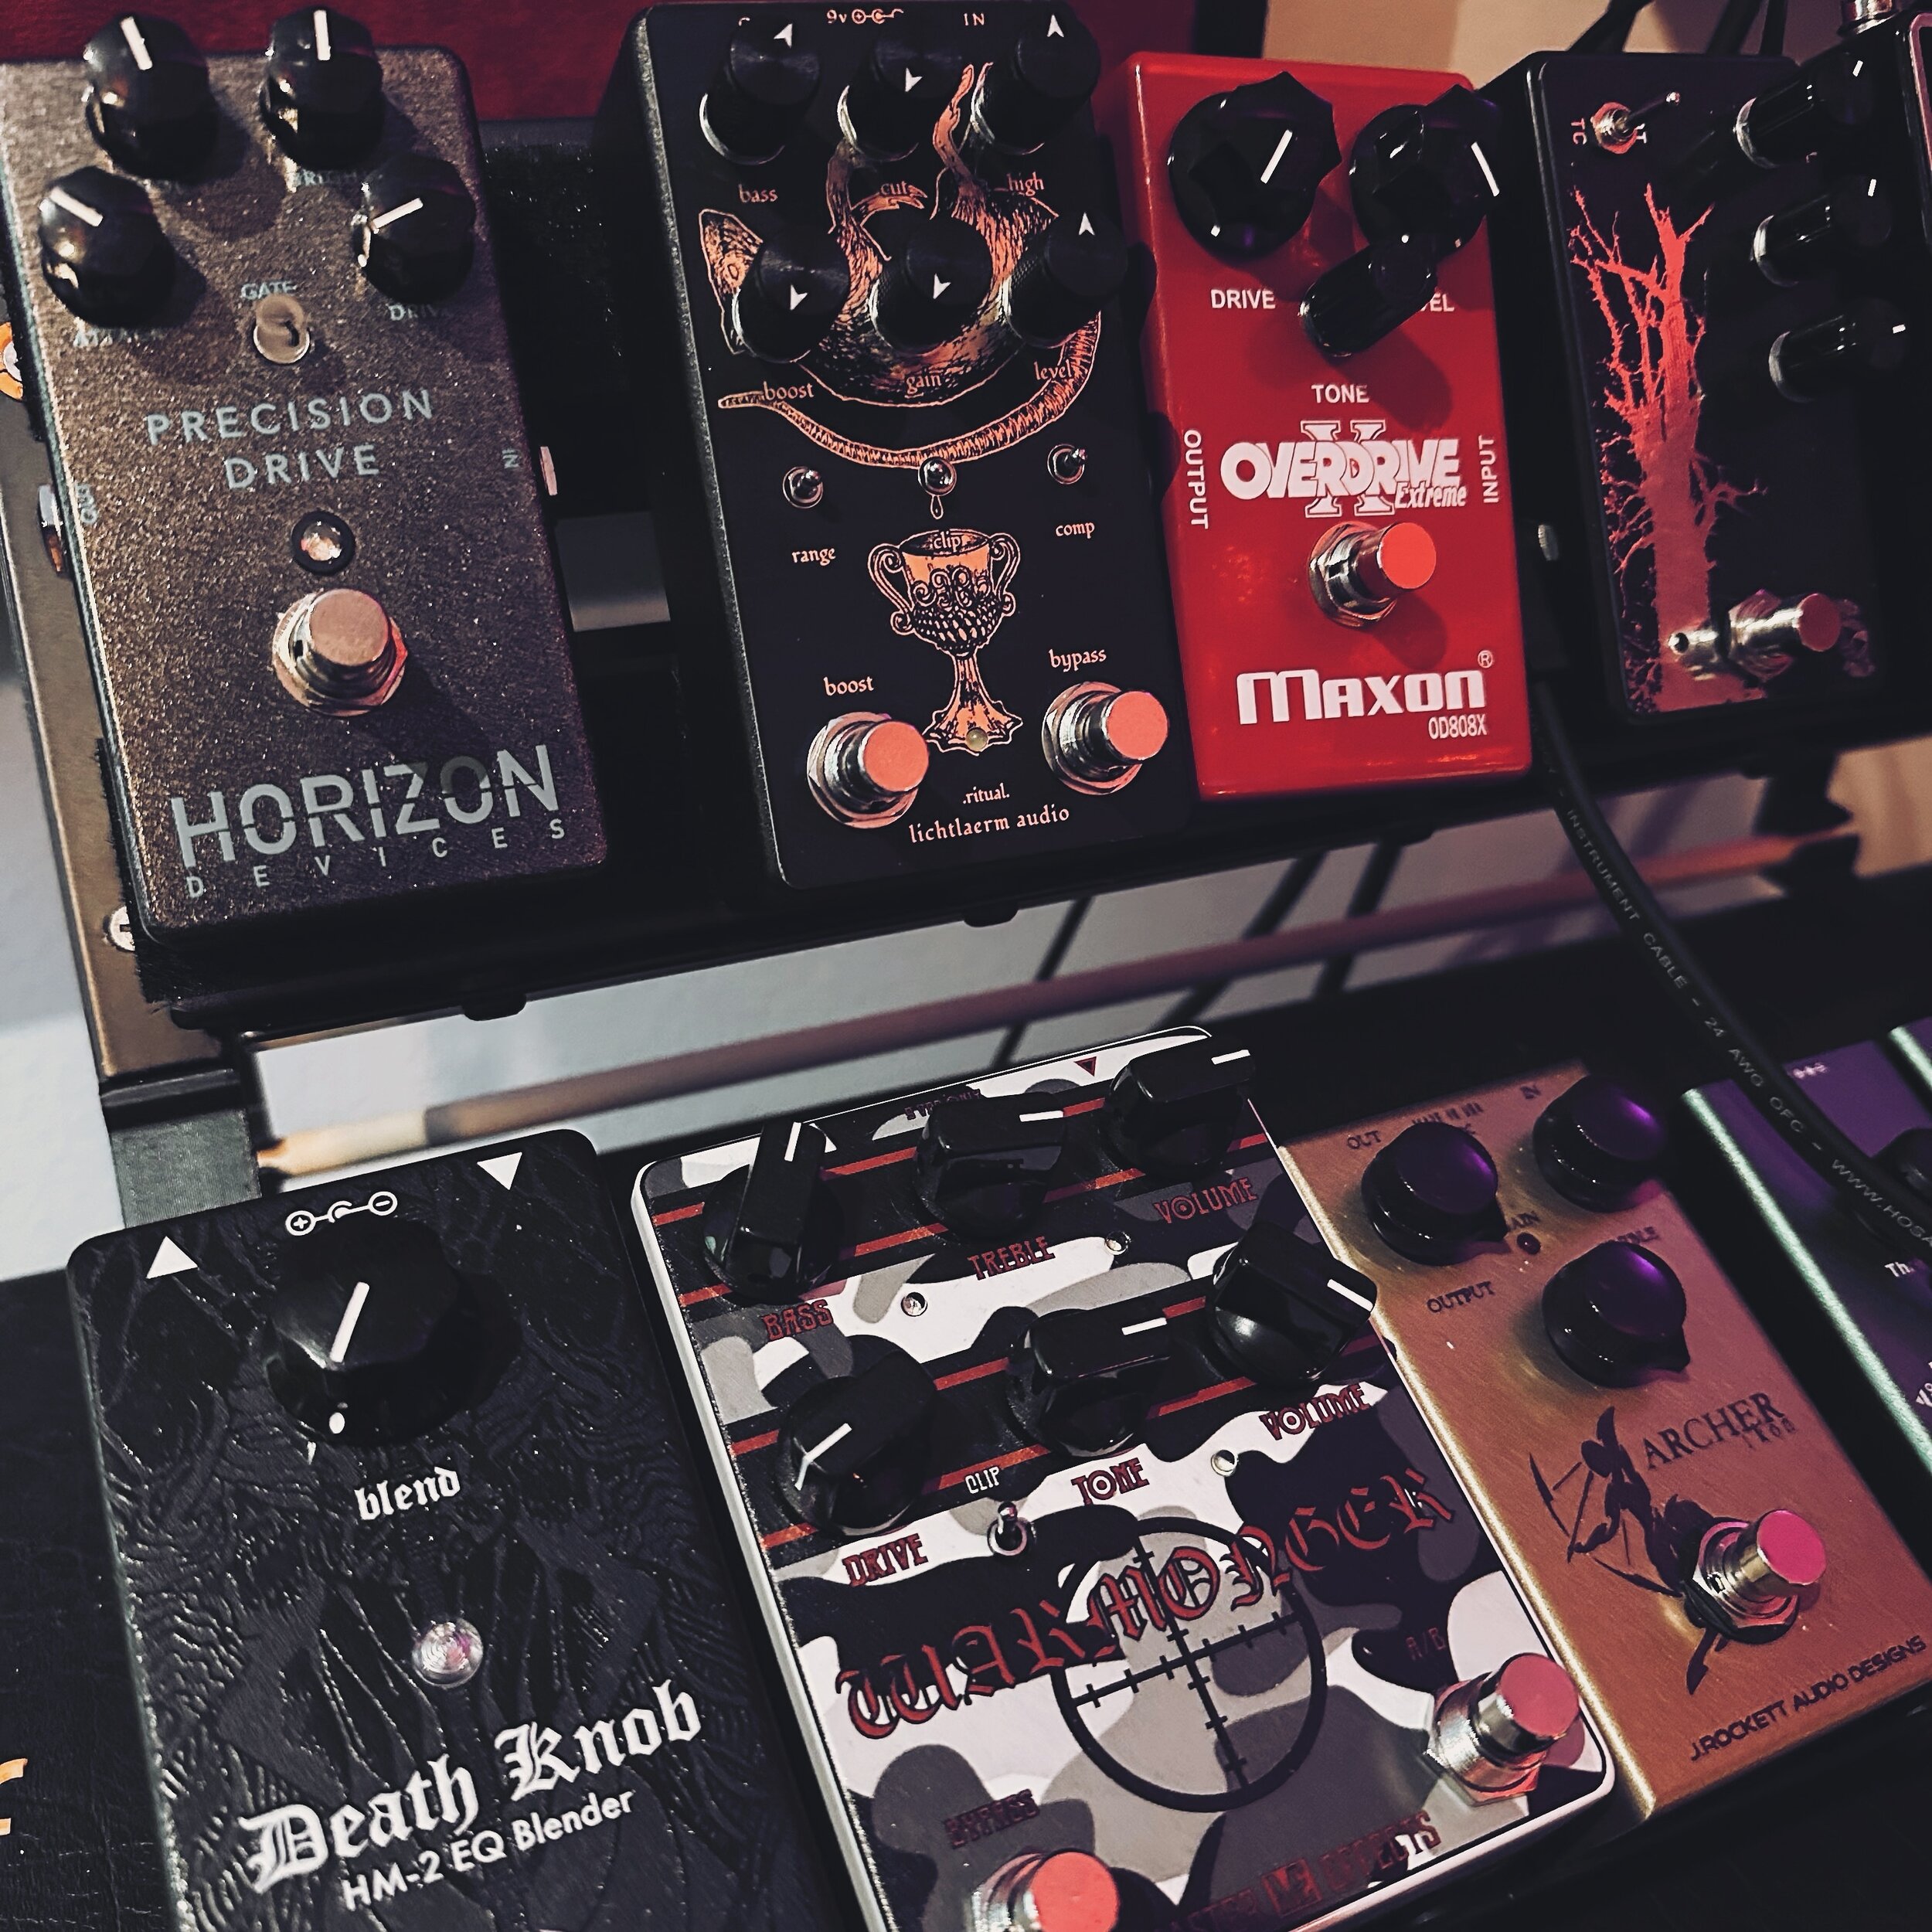 Lichtlaerm Audio Ritual spotted at @keithmerrow's studio today, along with some other favorites (looking at you, Dunn Effects and Pepers Pedals)! 

Already running on fumes with a lot of the Lichtlaerm stuff, just sayin'...

#lichtlaermaudio #dunneff